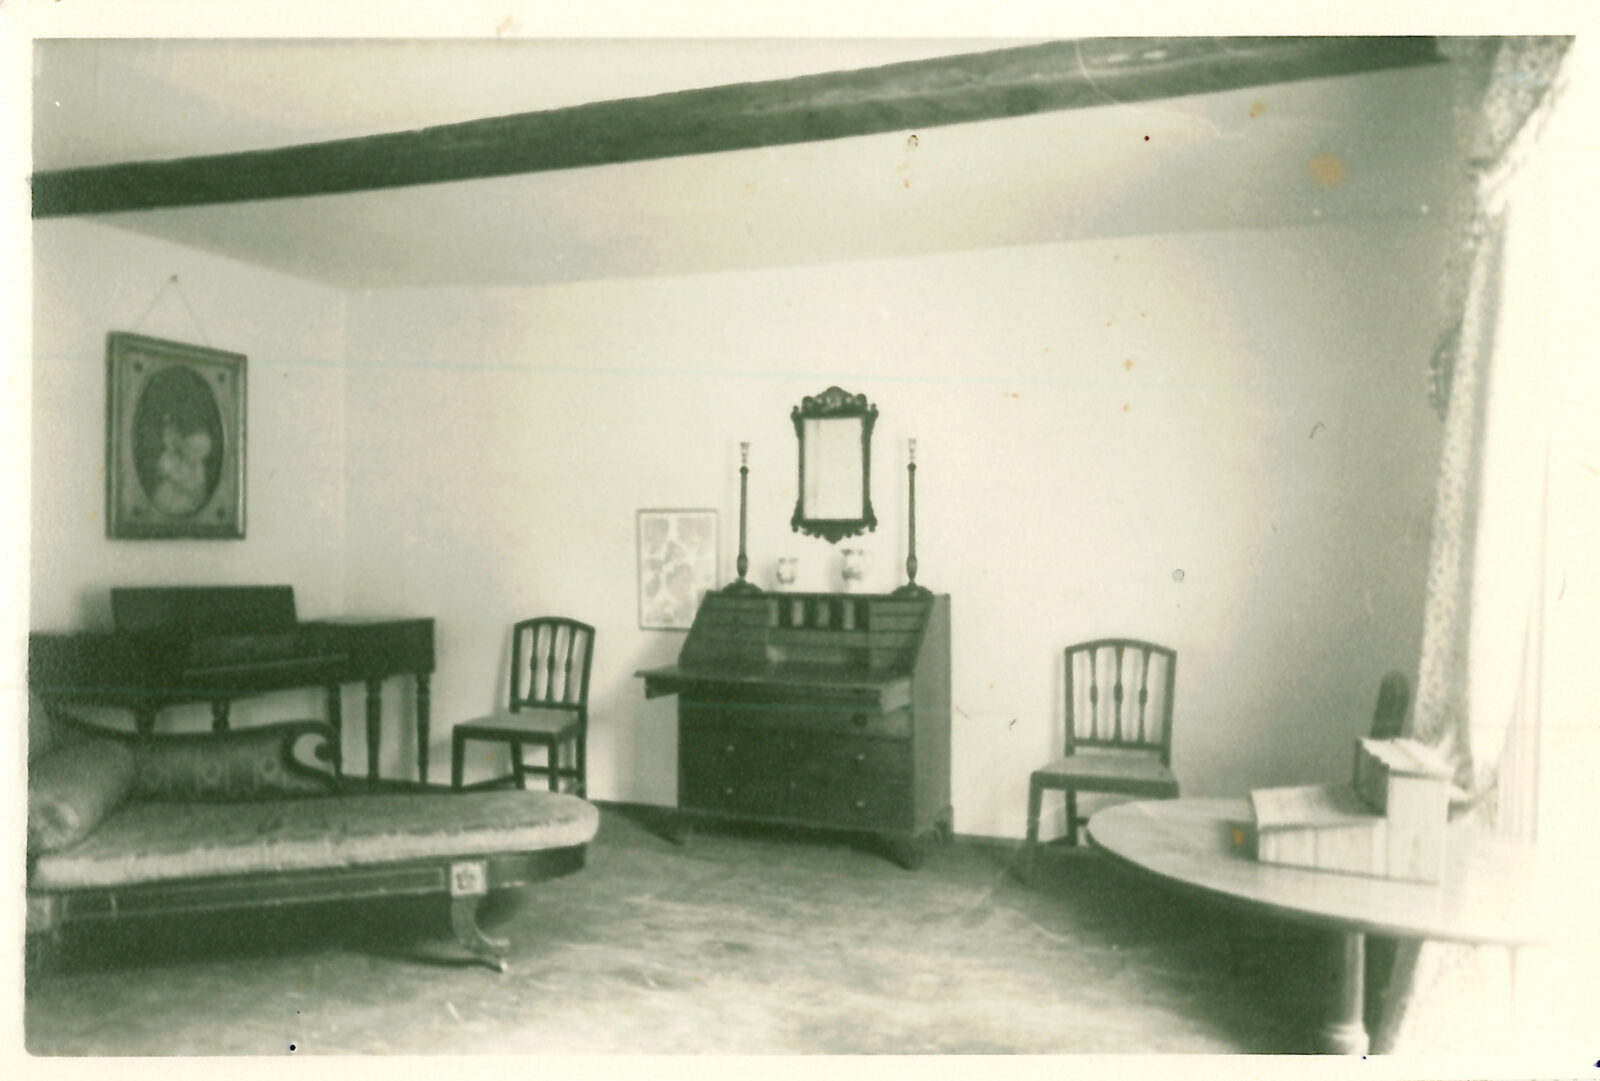 The Drawing Room at Jane Austens House, in the early days of the museum